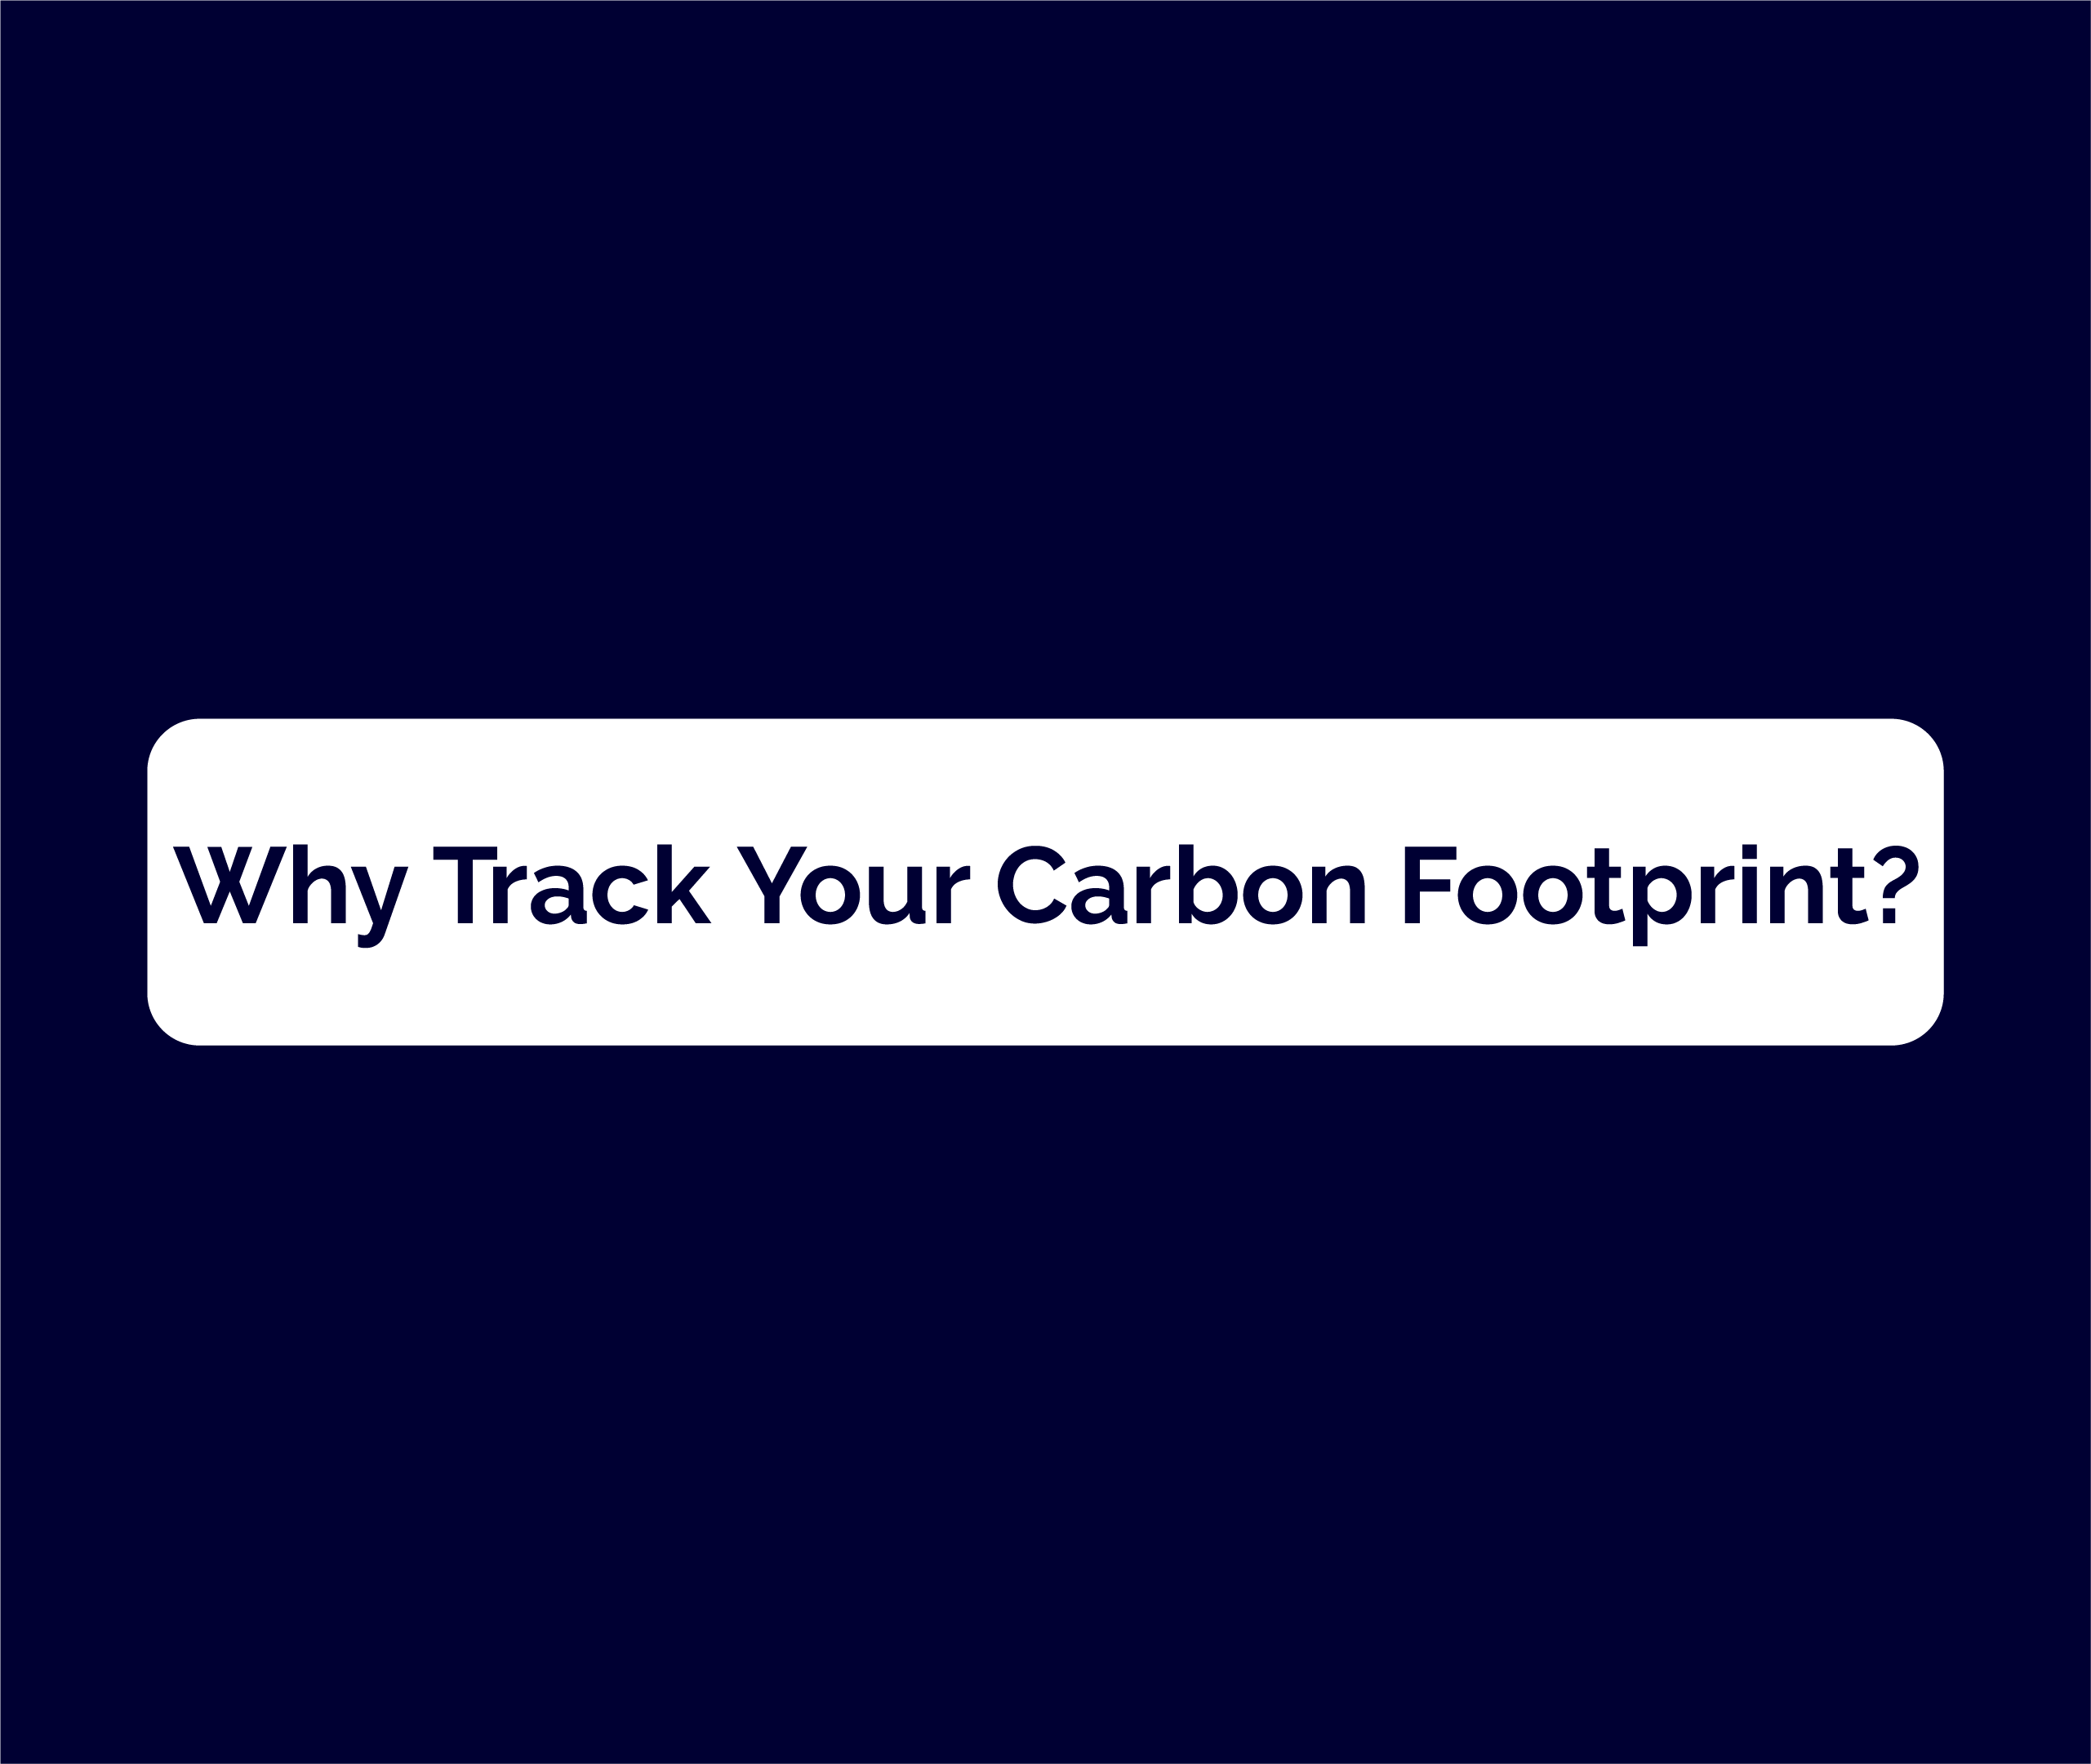 Why Track Your Carbon Footprint?